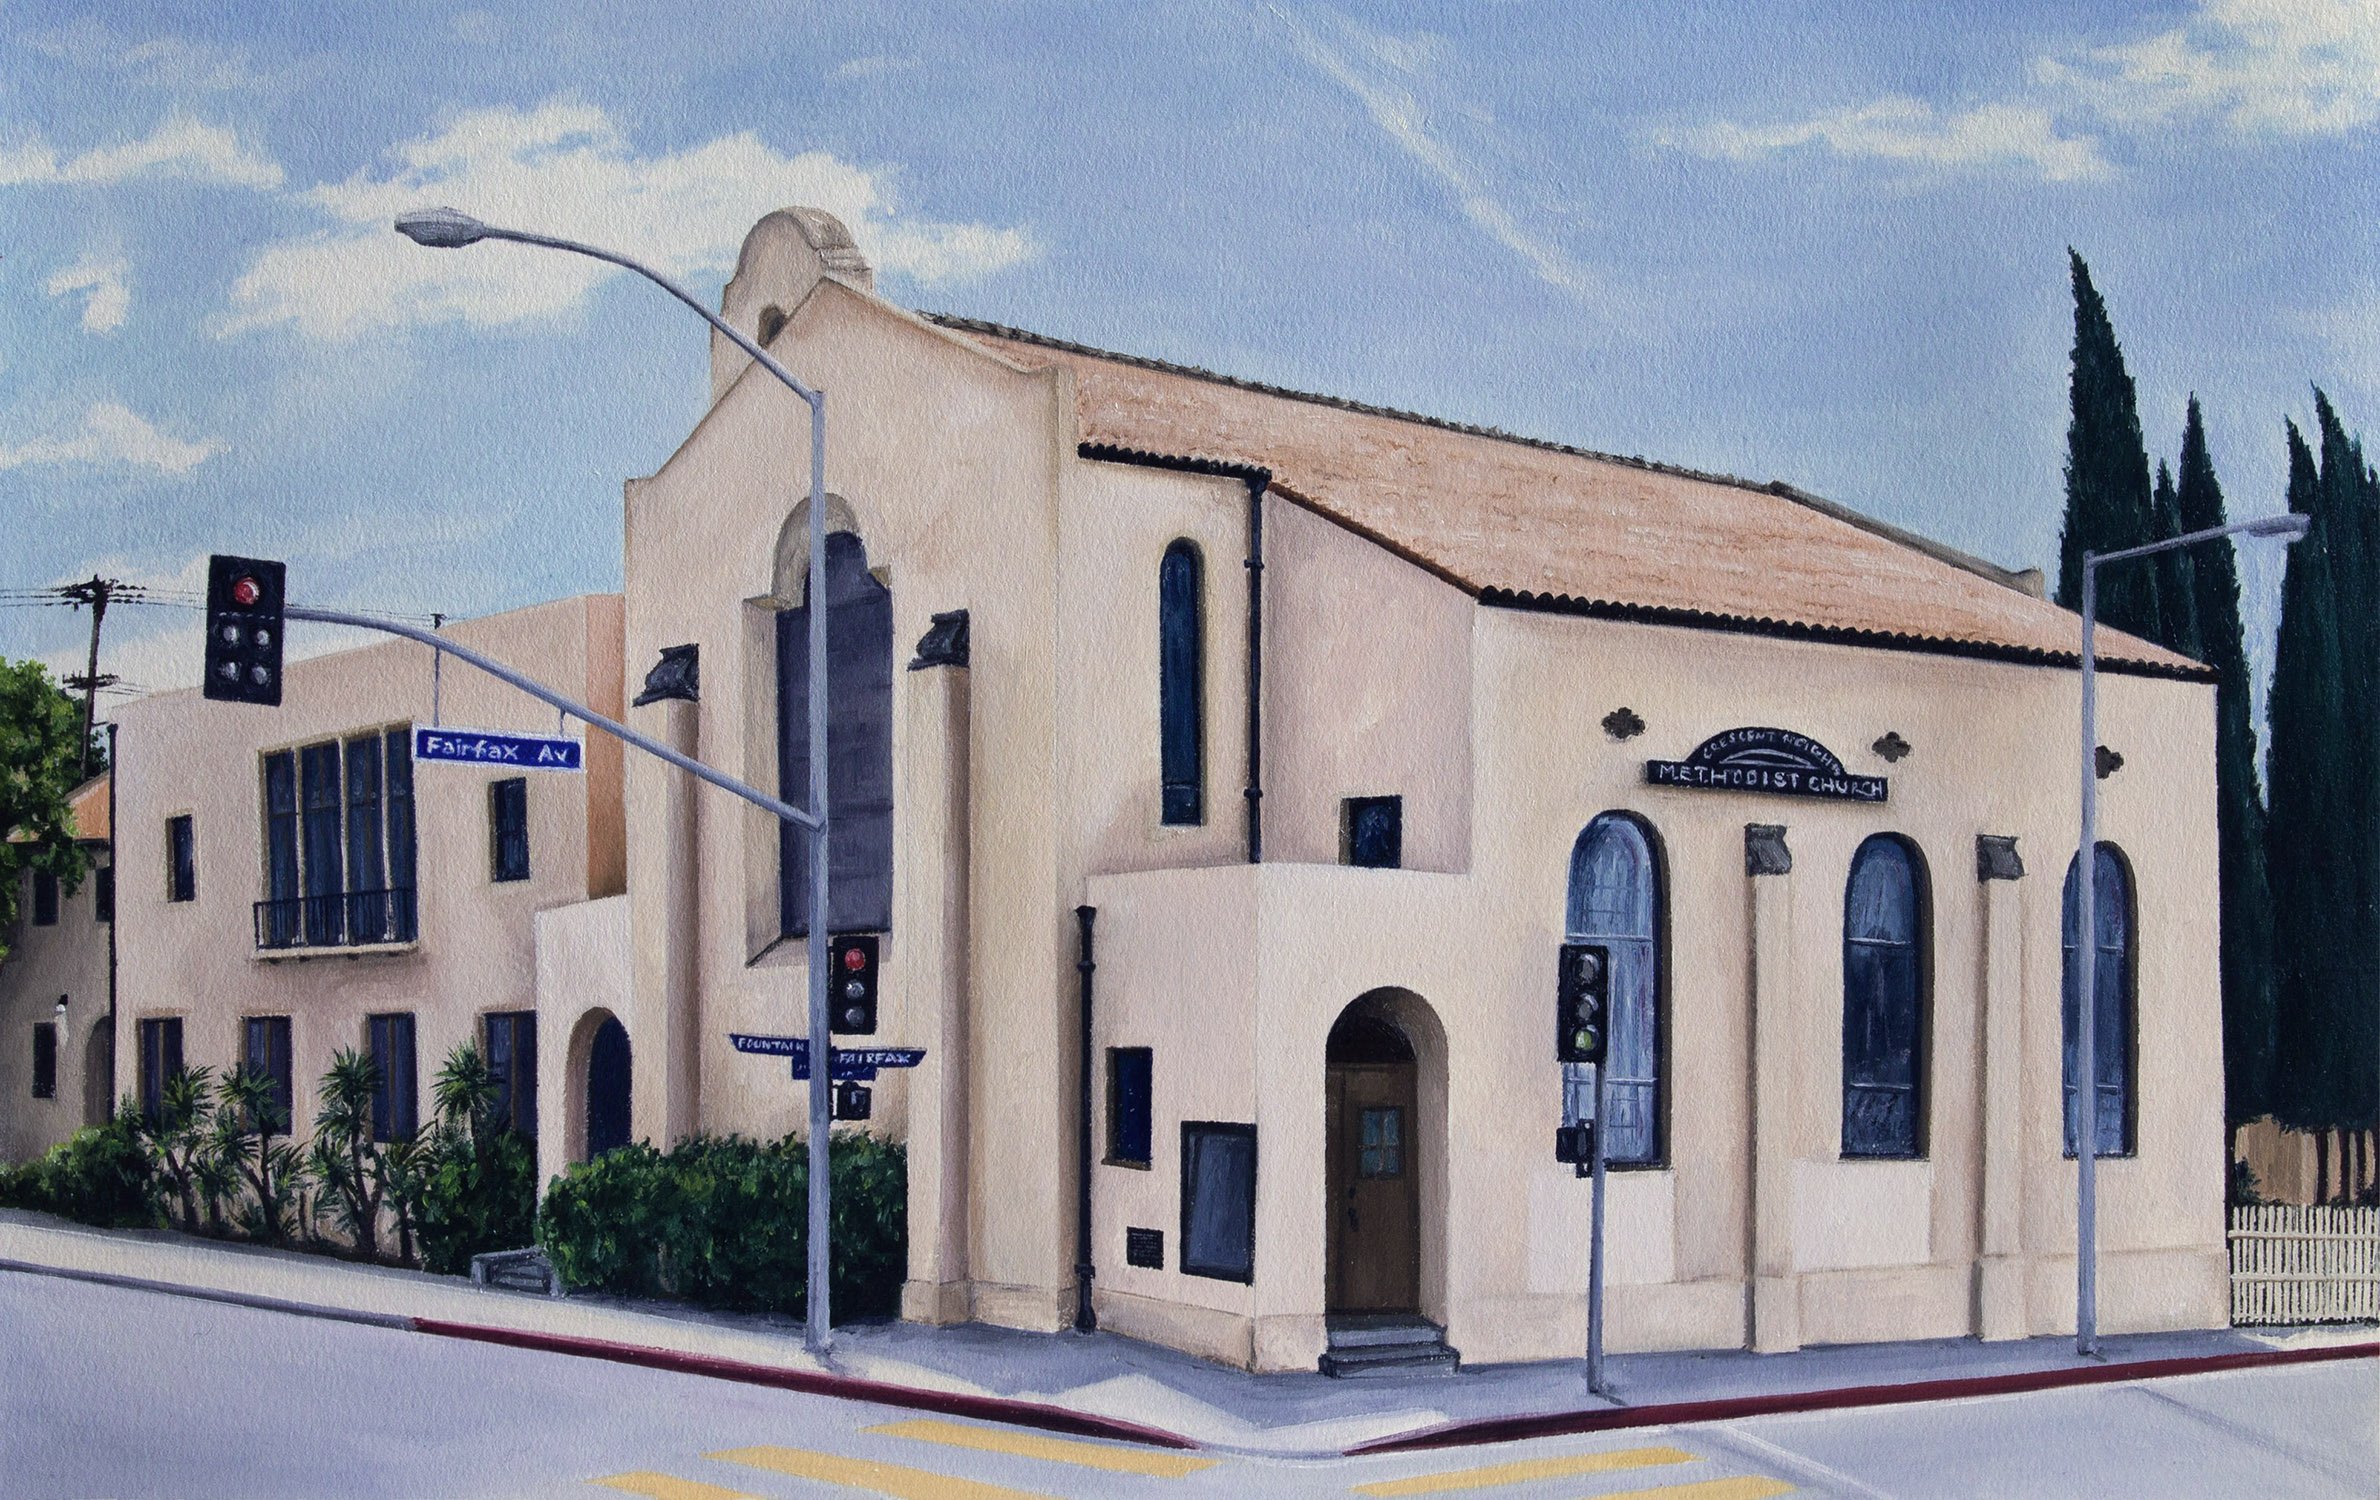 Fountain and Fairfax painting commission 72dpi.jpg